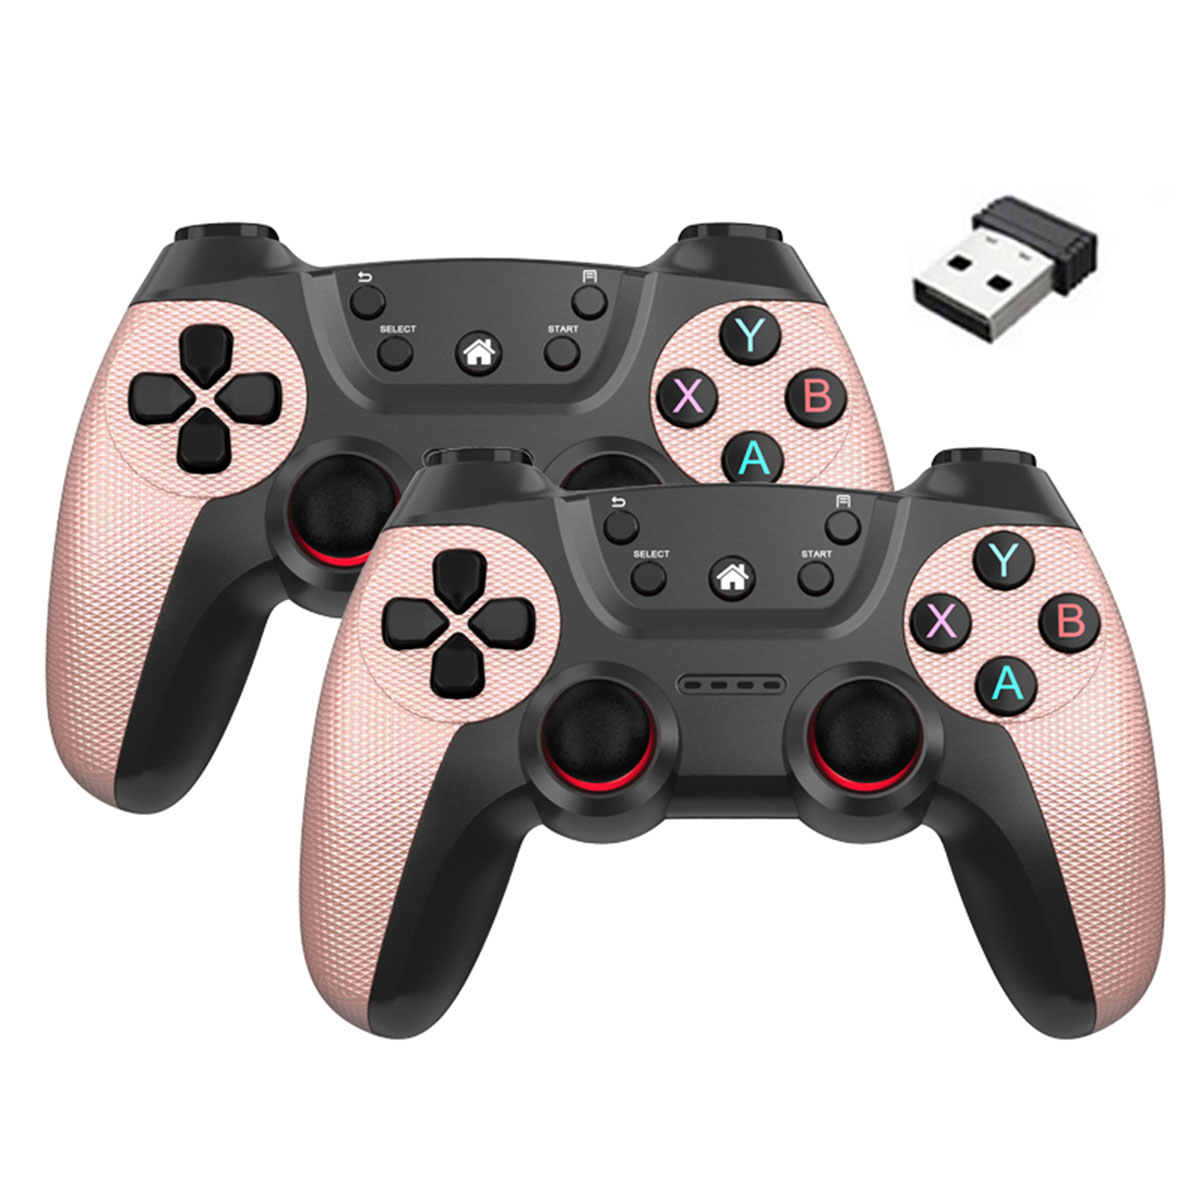 TADOW Doppeltes Gamepad,Bluetooth Gamepad,Vibration,2.4G Wireless,für Rosenrosa PC,Android Controller